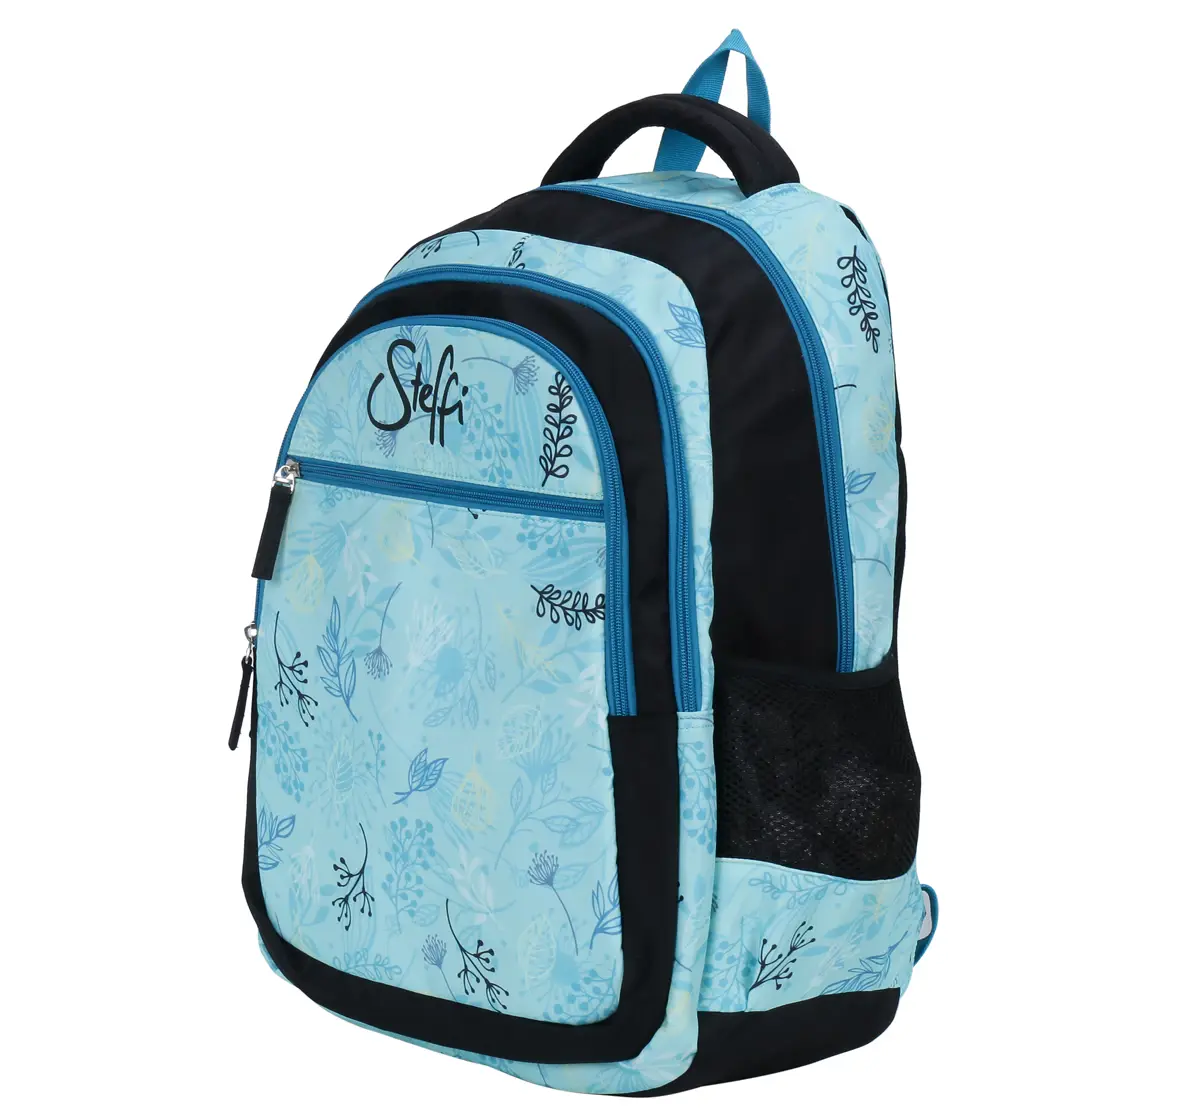 Simba Steffi Love Chry Bluebell 19 Backpack Multicolor 3Y+